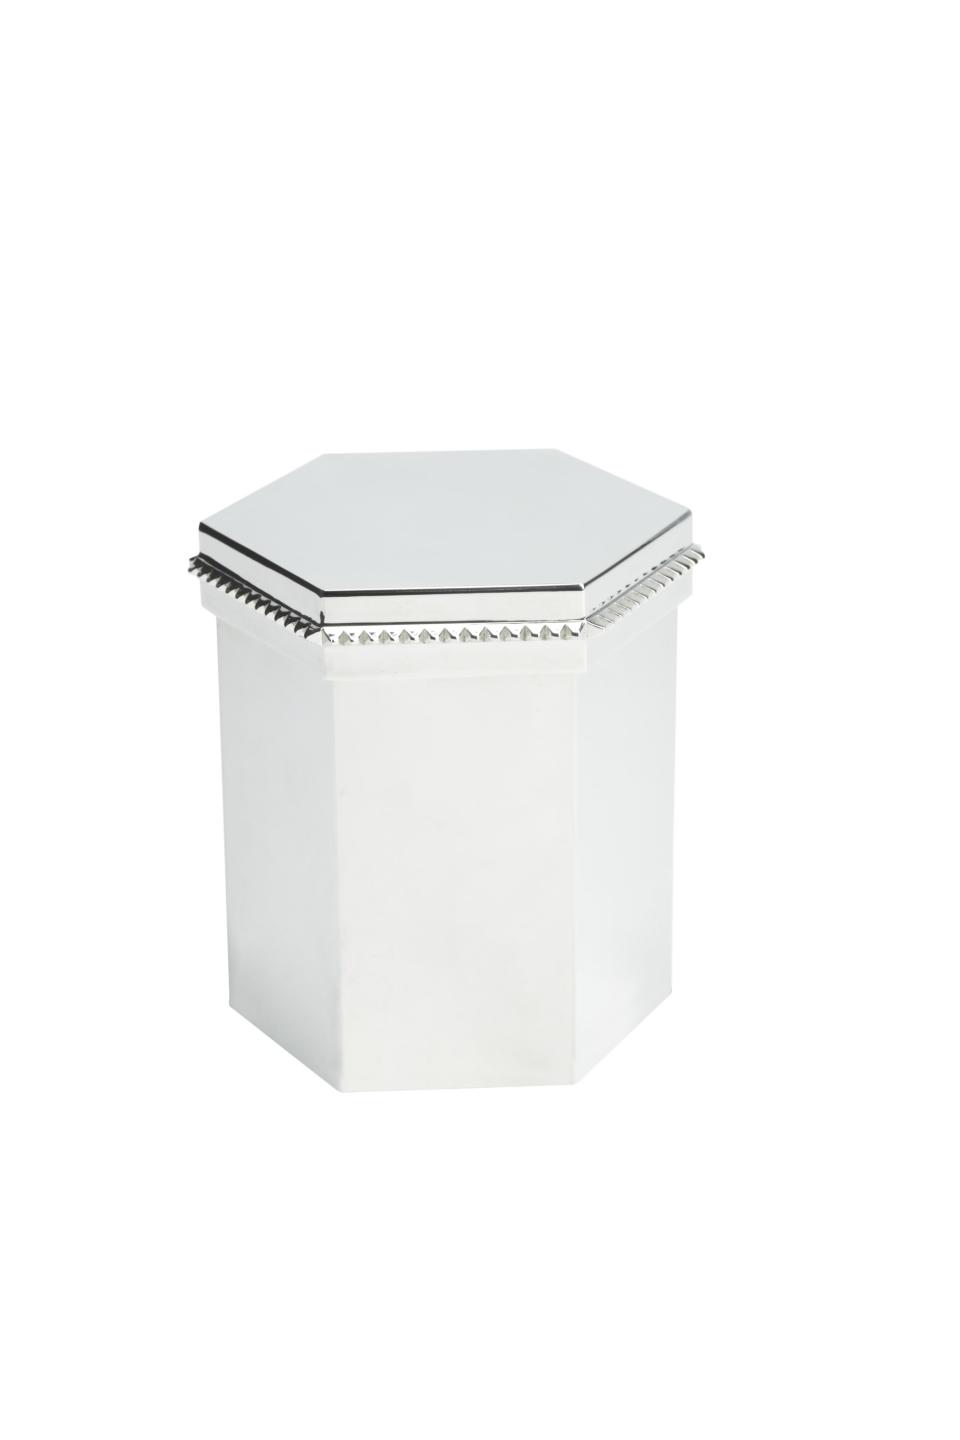 <b>Eddie Borgo for Target + Neiman Marcus Holiday Collection Accent Box</b><br><br> Price: $49.99<br><br>